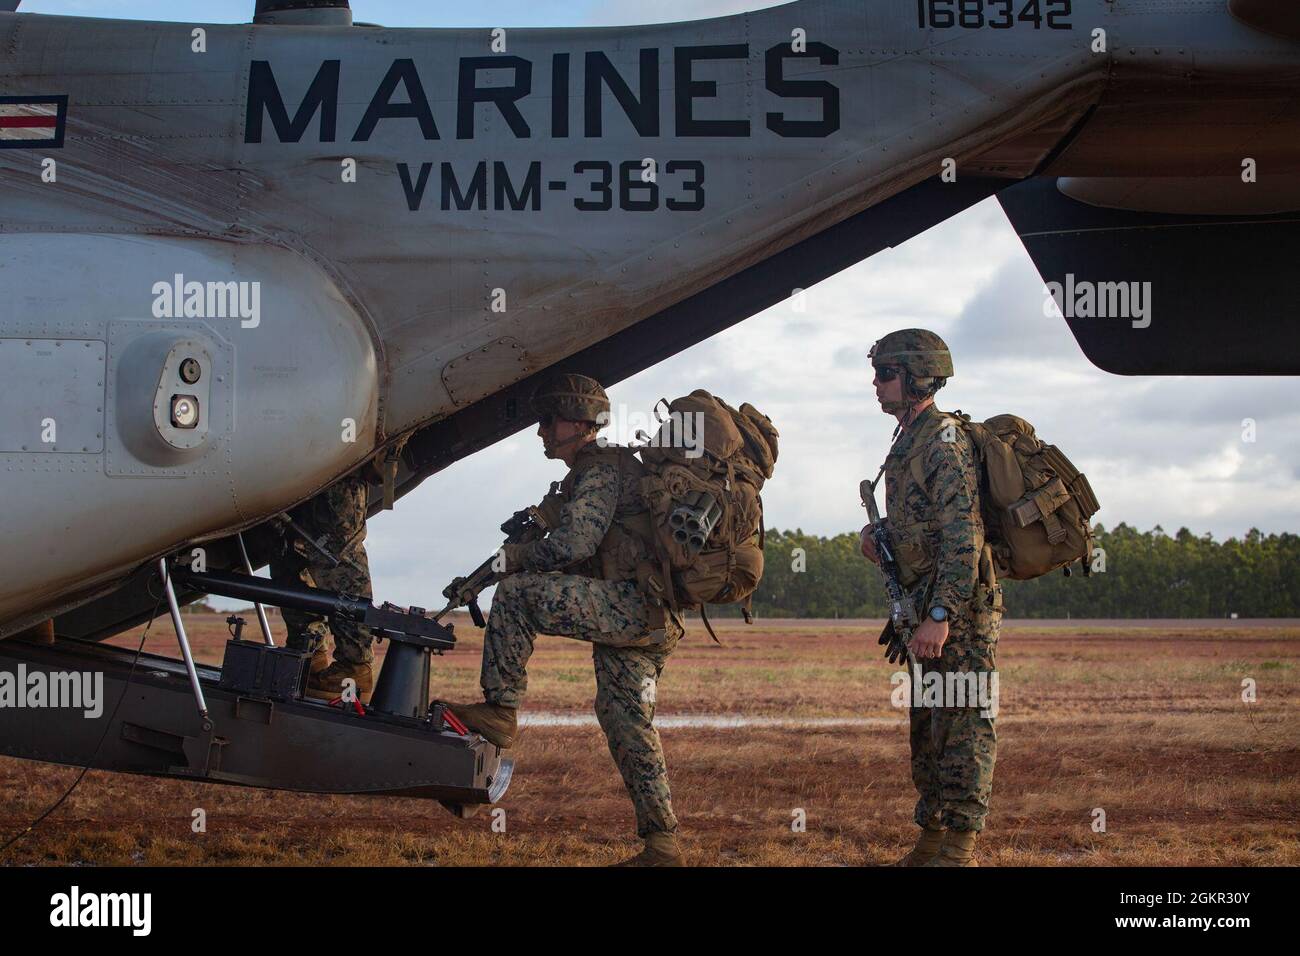 U.S. Marines with Charlie Company, 1st Battalion, 7th Marine Regiment with Marine Rotational Force - Darwin, enter an MV-22B Osprey at Gove Airport in Nhulunbuy, NT, Australia, June 17, 2021. Marines redeployed from Nhulunbuy to Darwin on MV-22B Ospreys after the successful completion of Exercise Darrandarra. Darrandarra, meaning “together,” demonstrates the Marines Corps’ ability to operate with the Australian Defence Force and reinforce embassies and conduct noncombatant evacuation operations in response to crises and contingencies in the Indo-Pacific region. Stock Photo